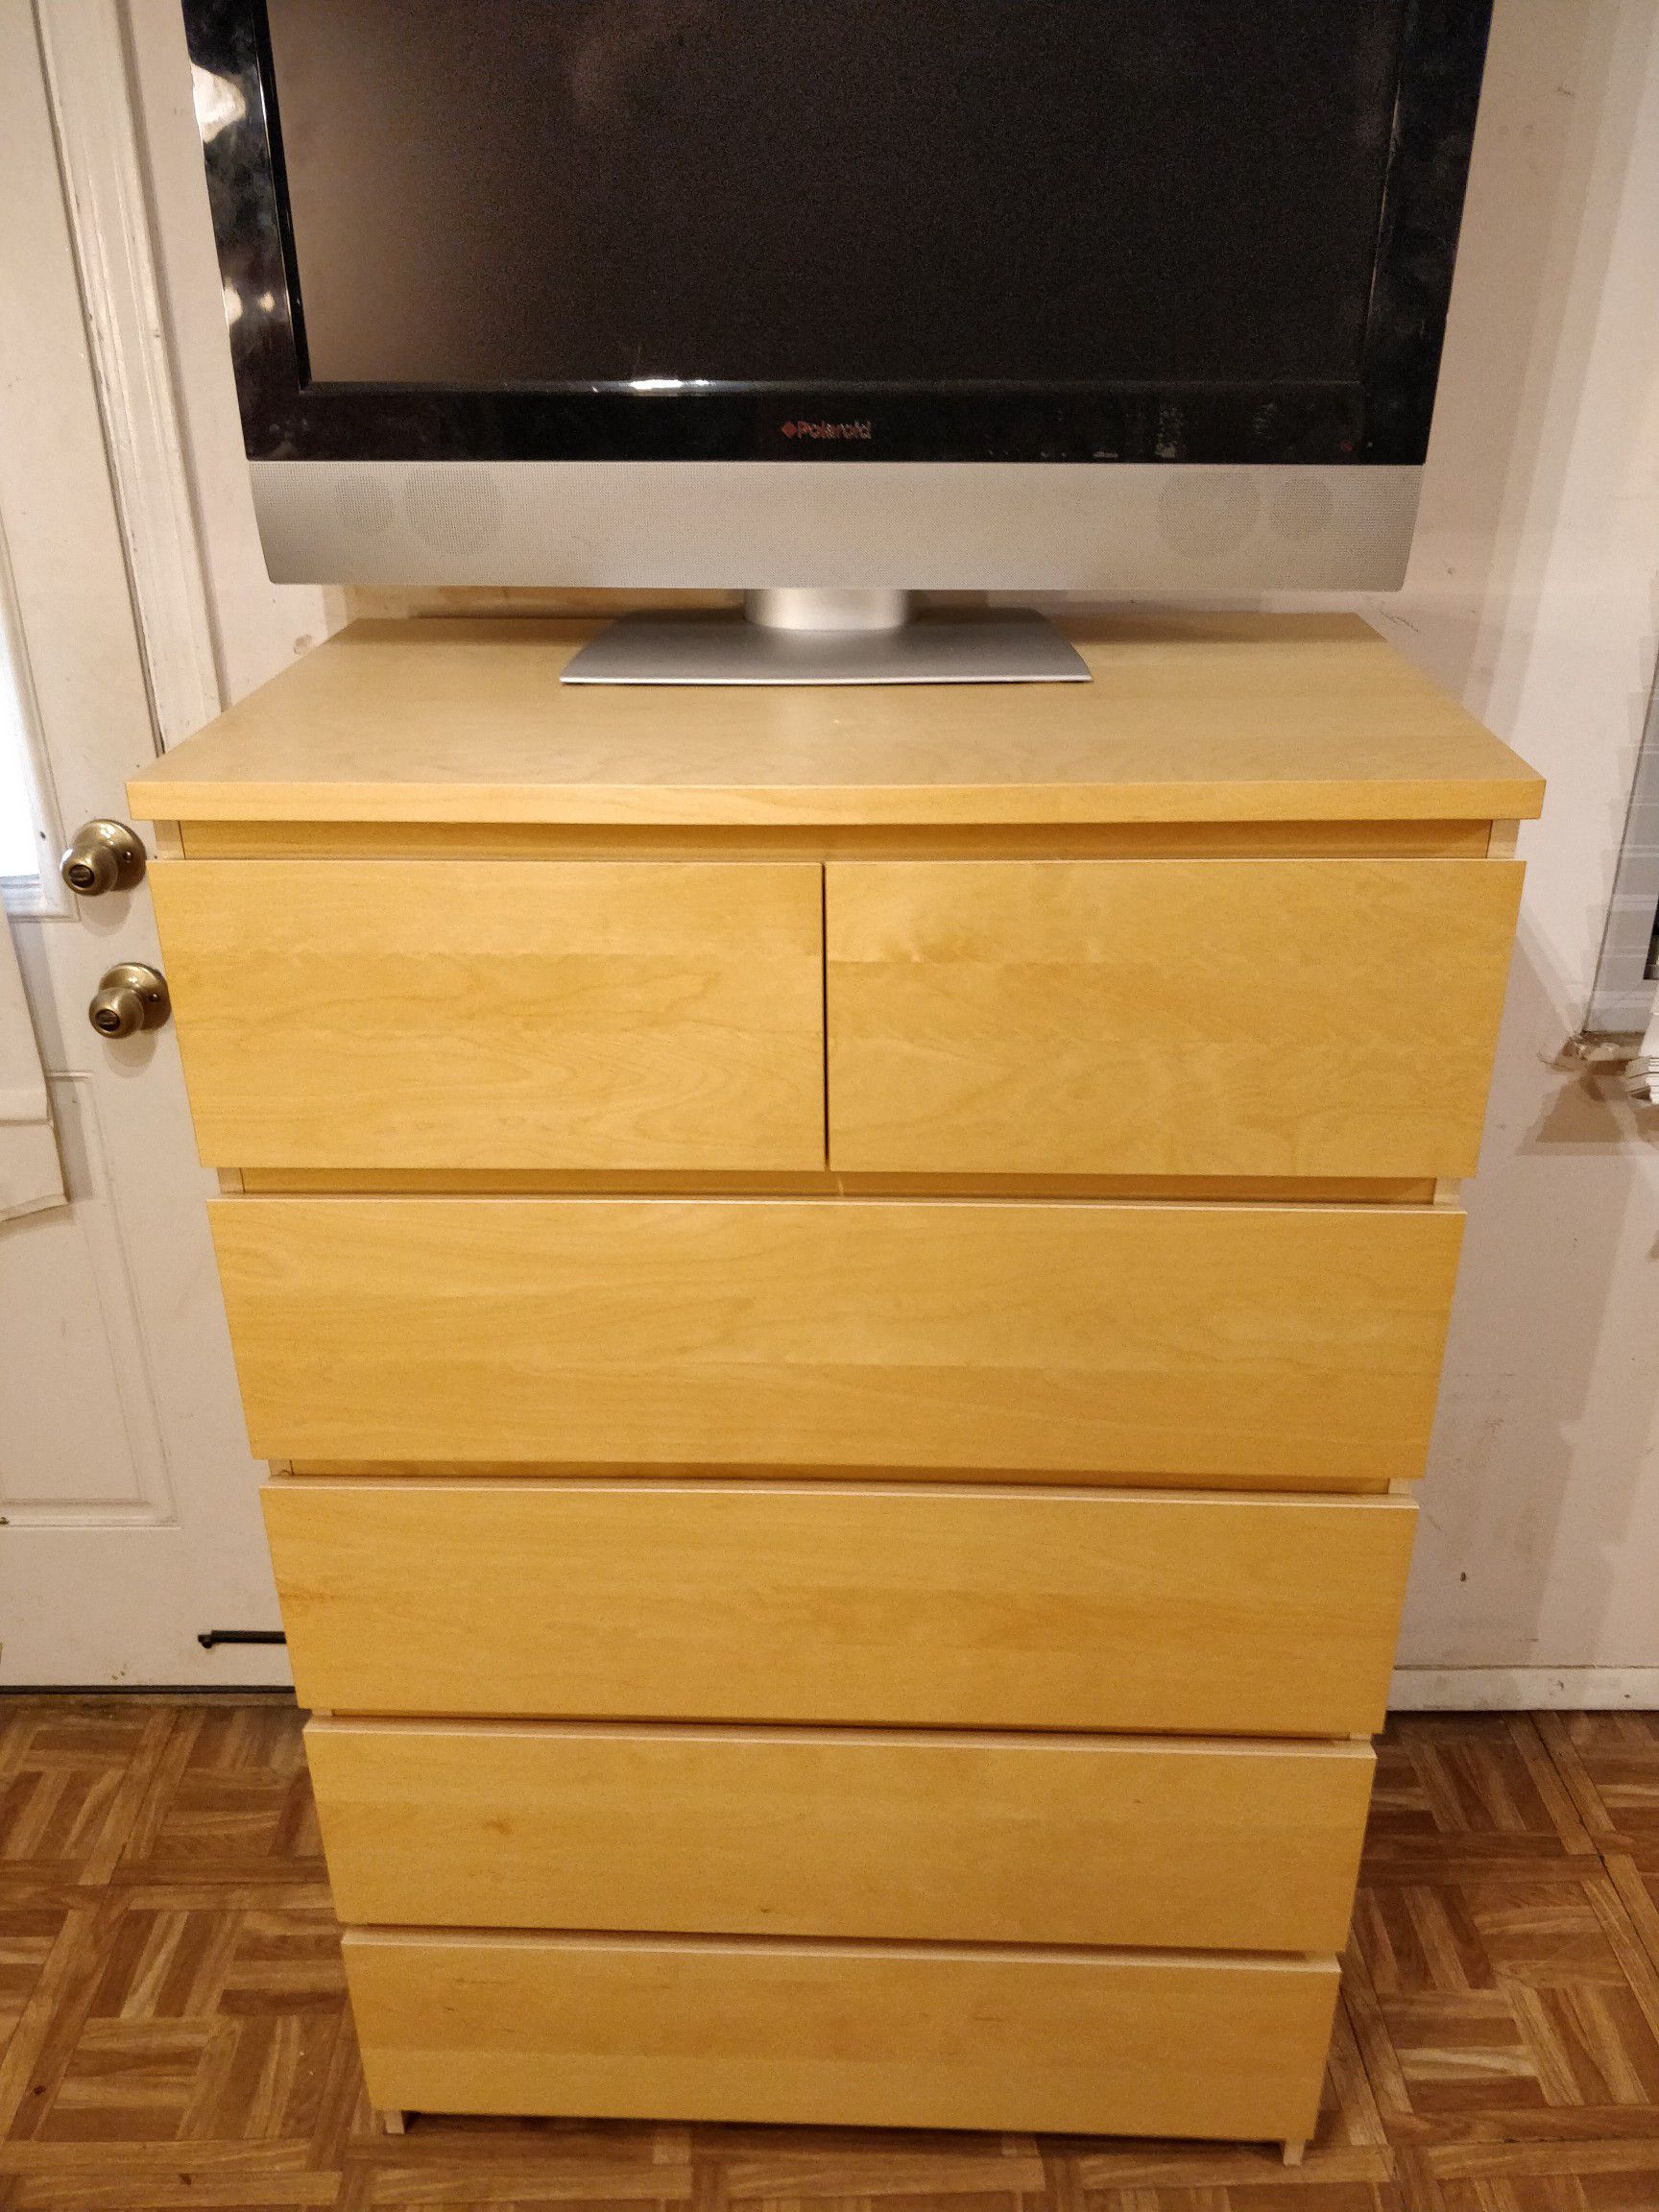 Like new big chest dresser with big drawers in great condition, all drawers sliding smoothly, pet free smoke free. L31.5"*W18.5"*H48.5"